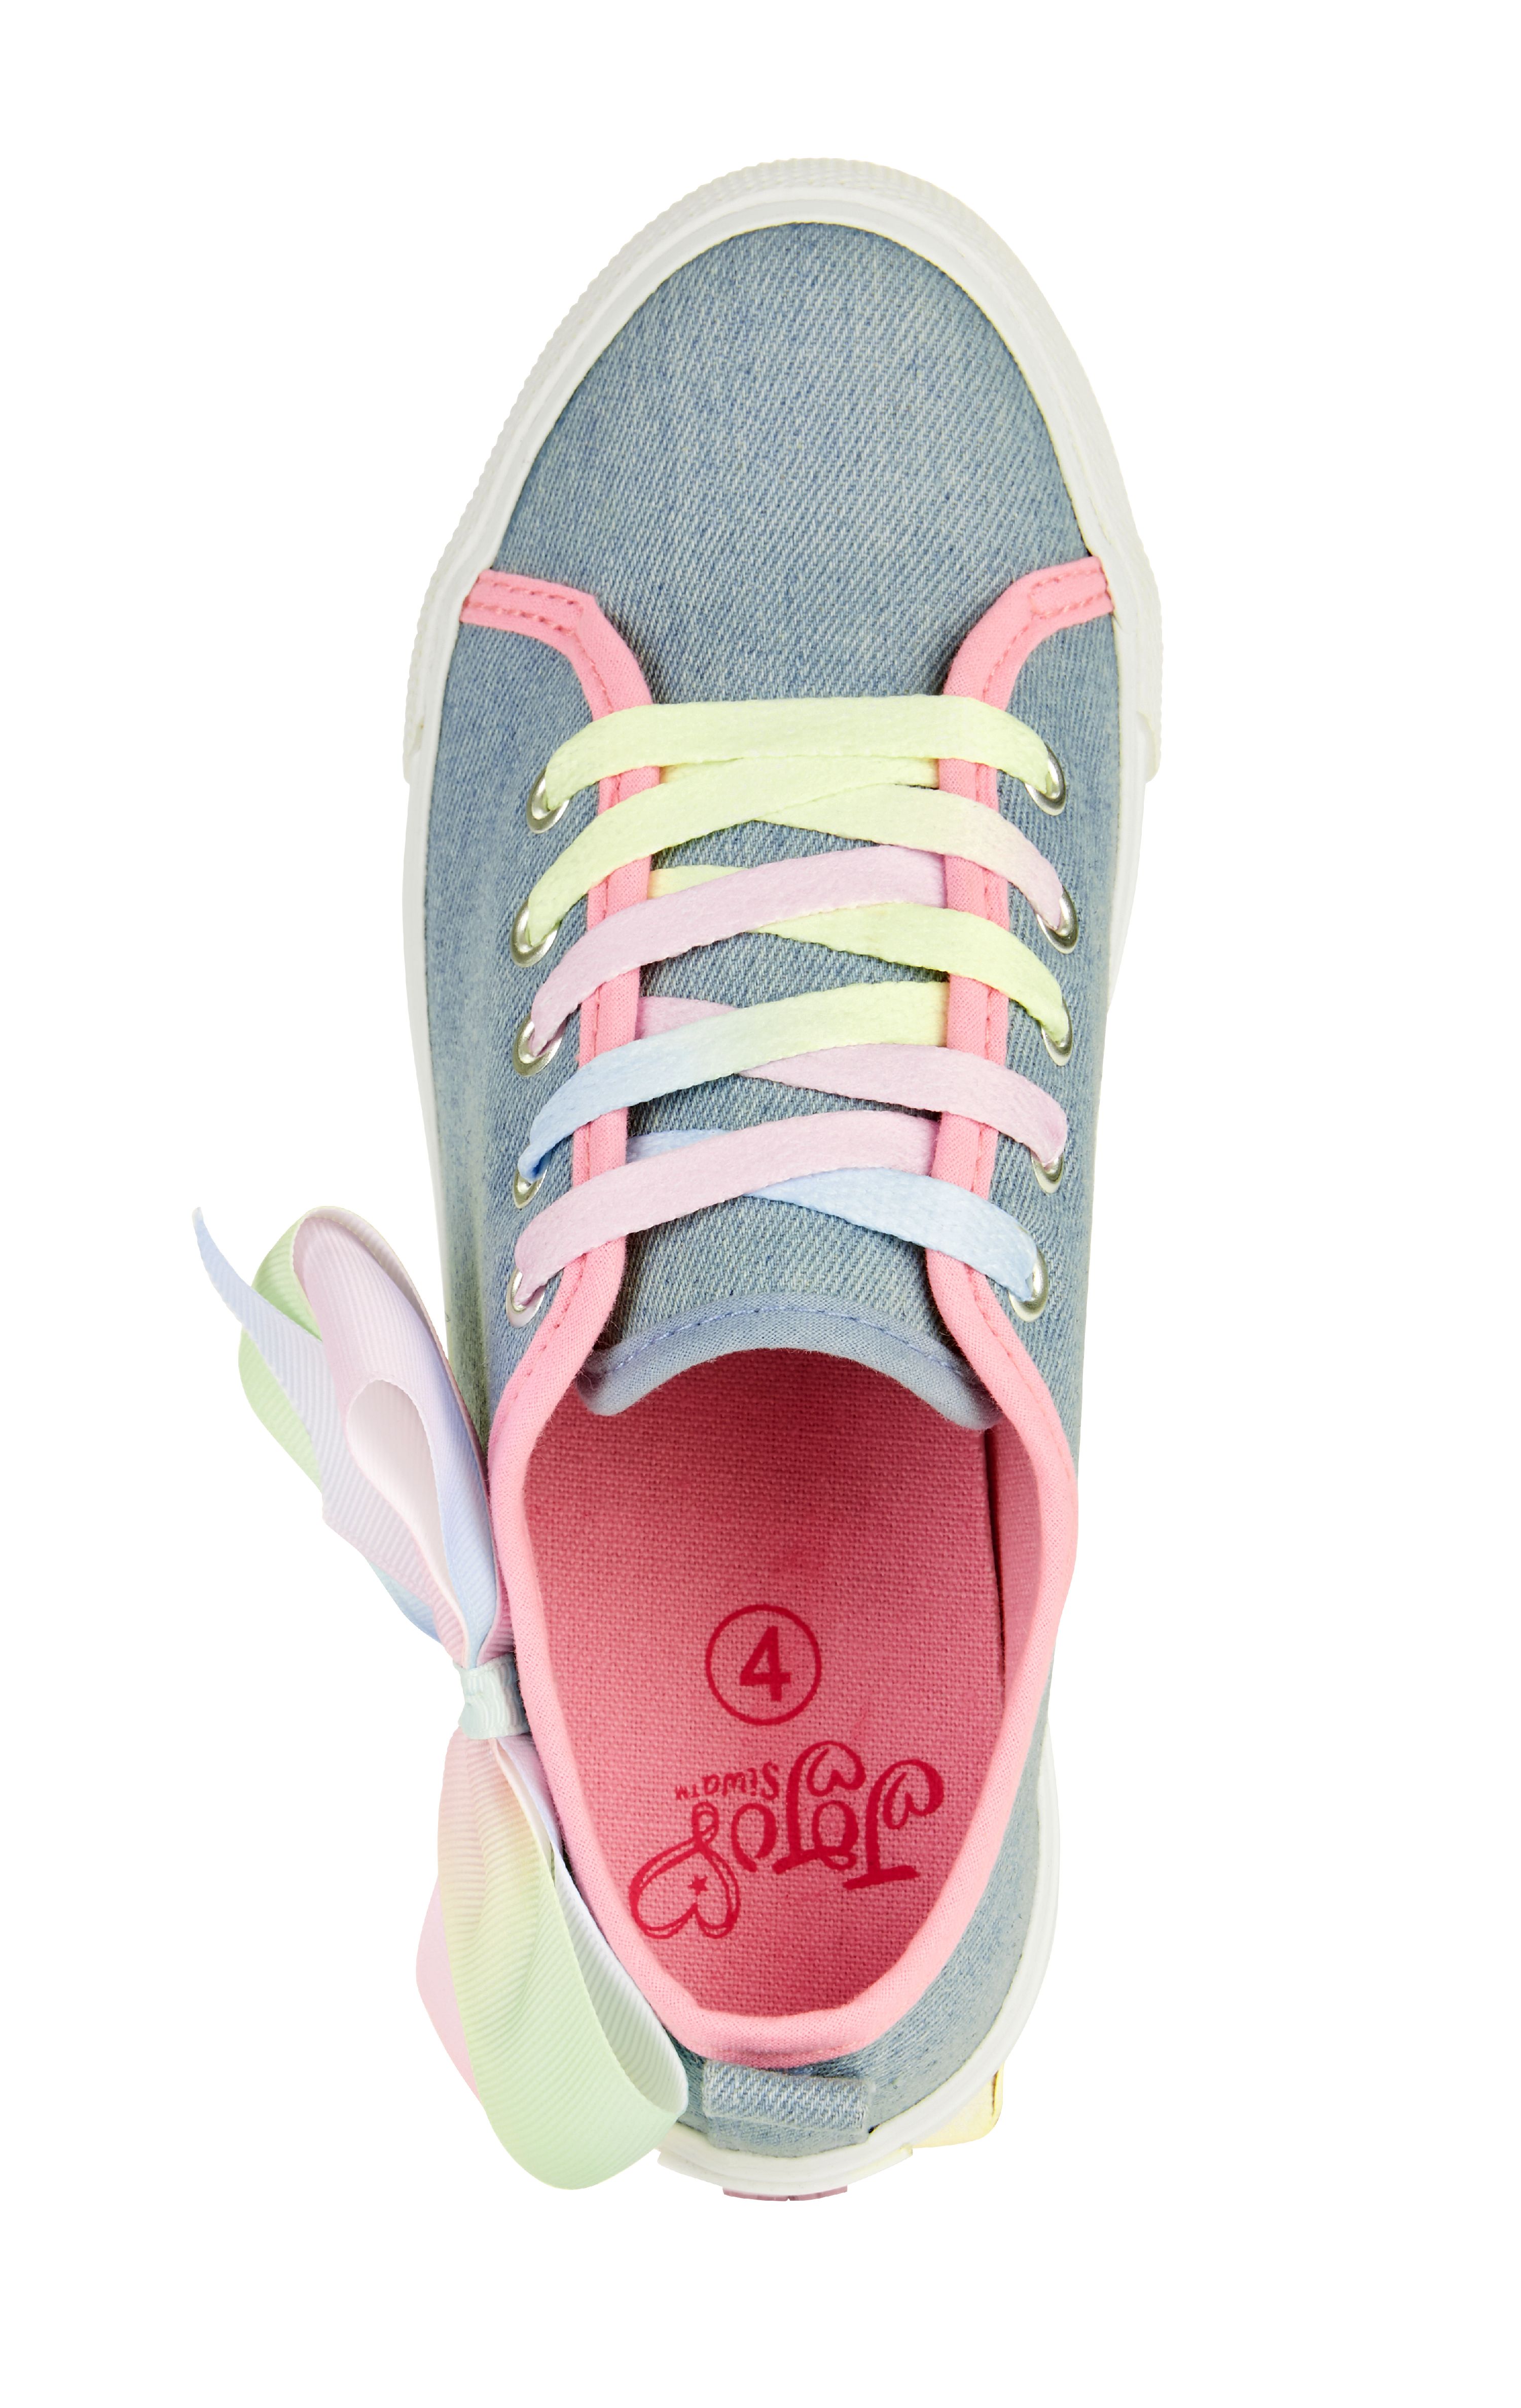 Jojo Siwa Girl's Denim Lace Up Sneakers With Bow - image 5 of 7